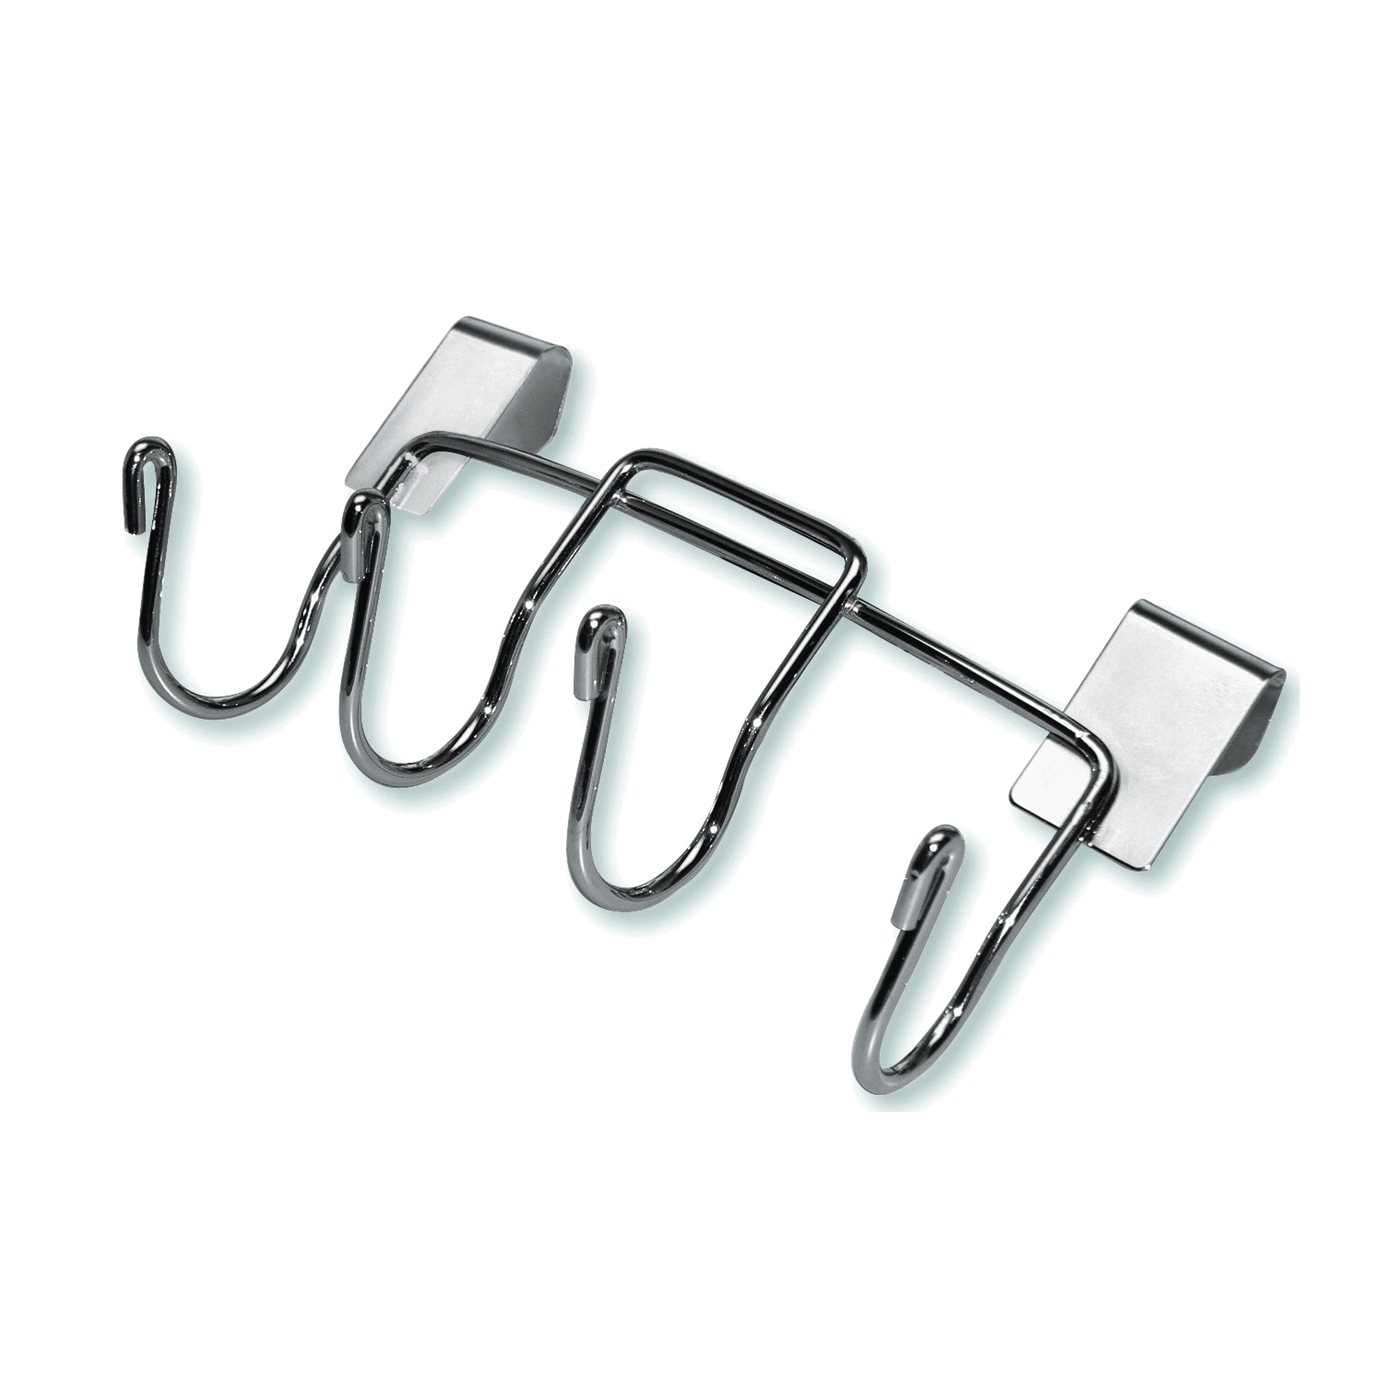 Weber 7401 Tool Hook, Heavy Duty, Steel, Plated, For: 18-1/2 and 22-1/2 in Charcoal Grills